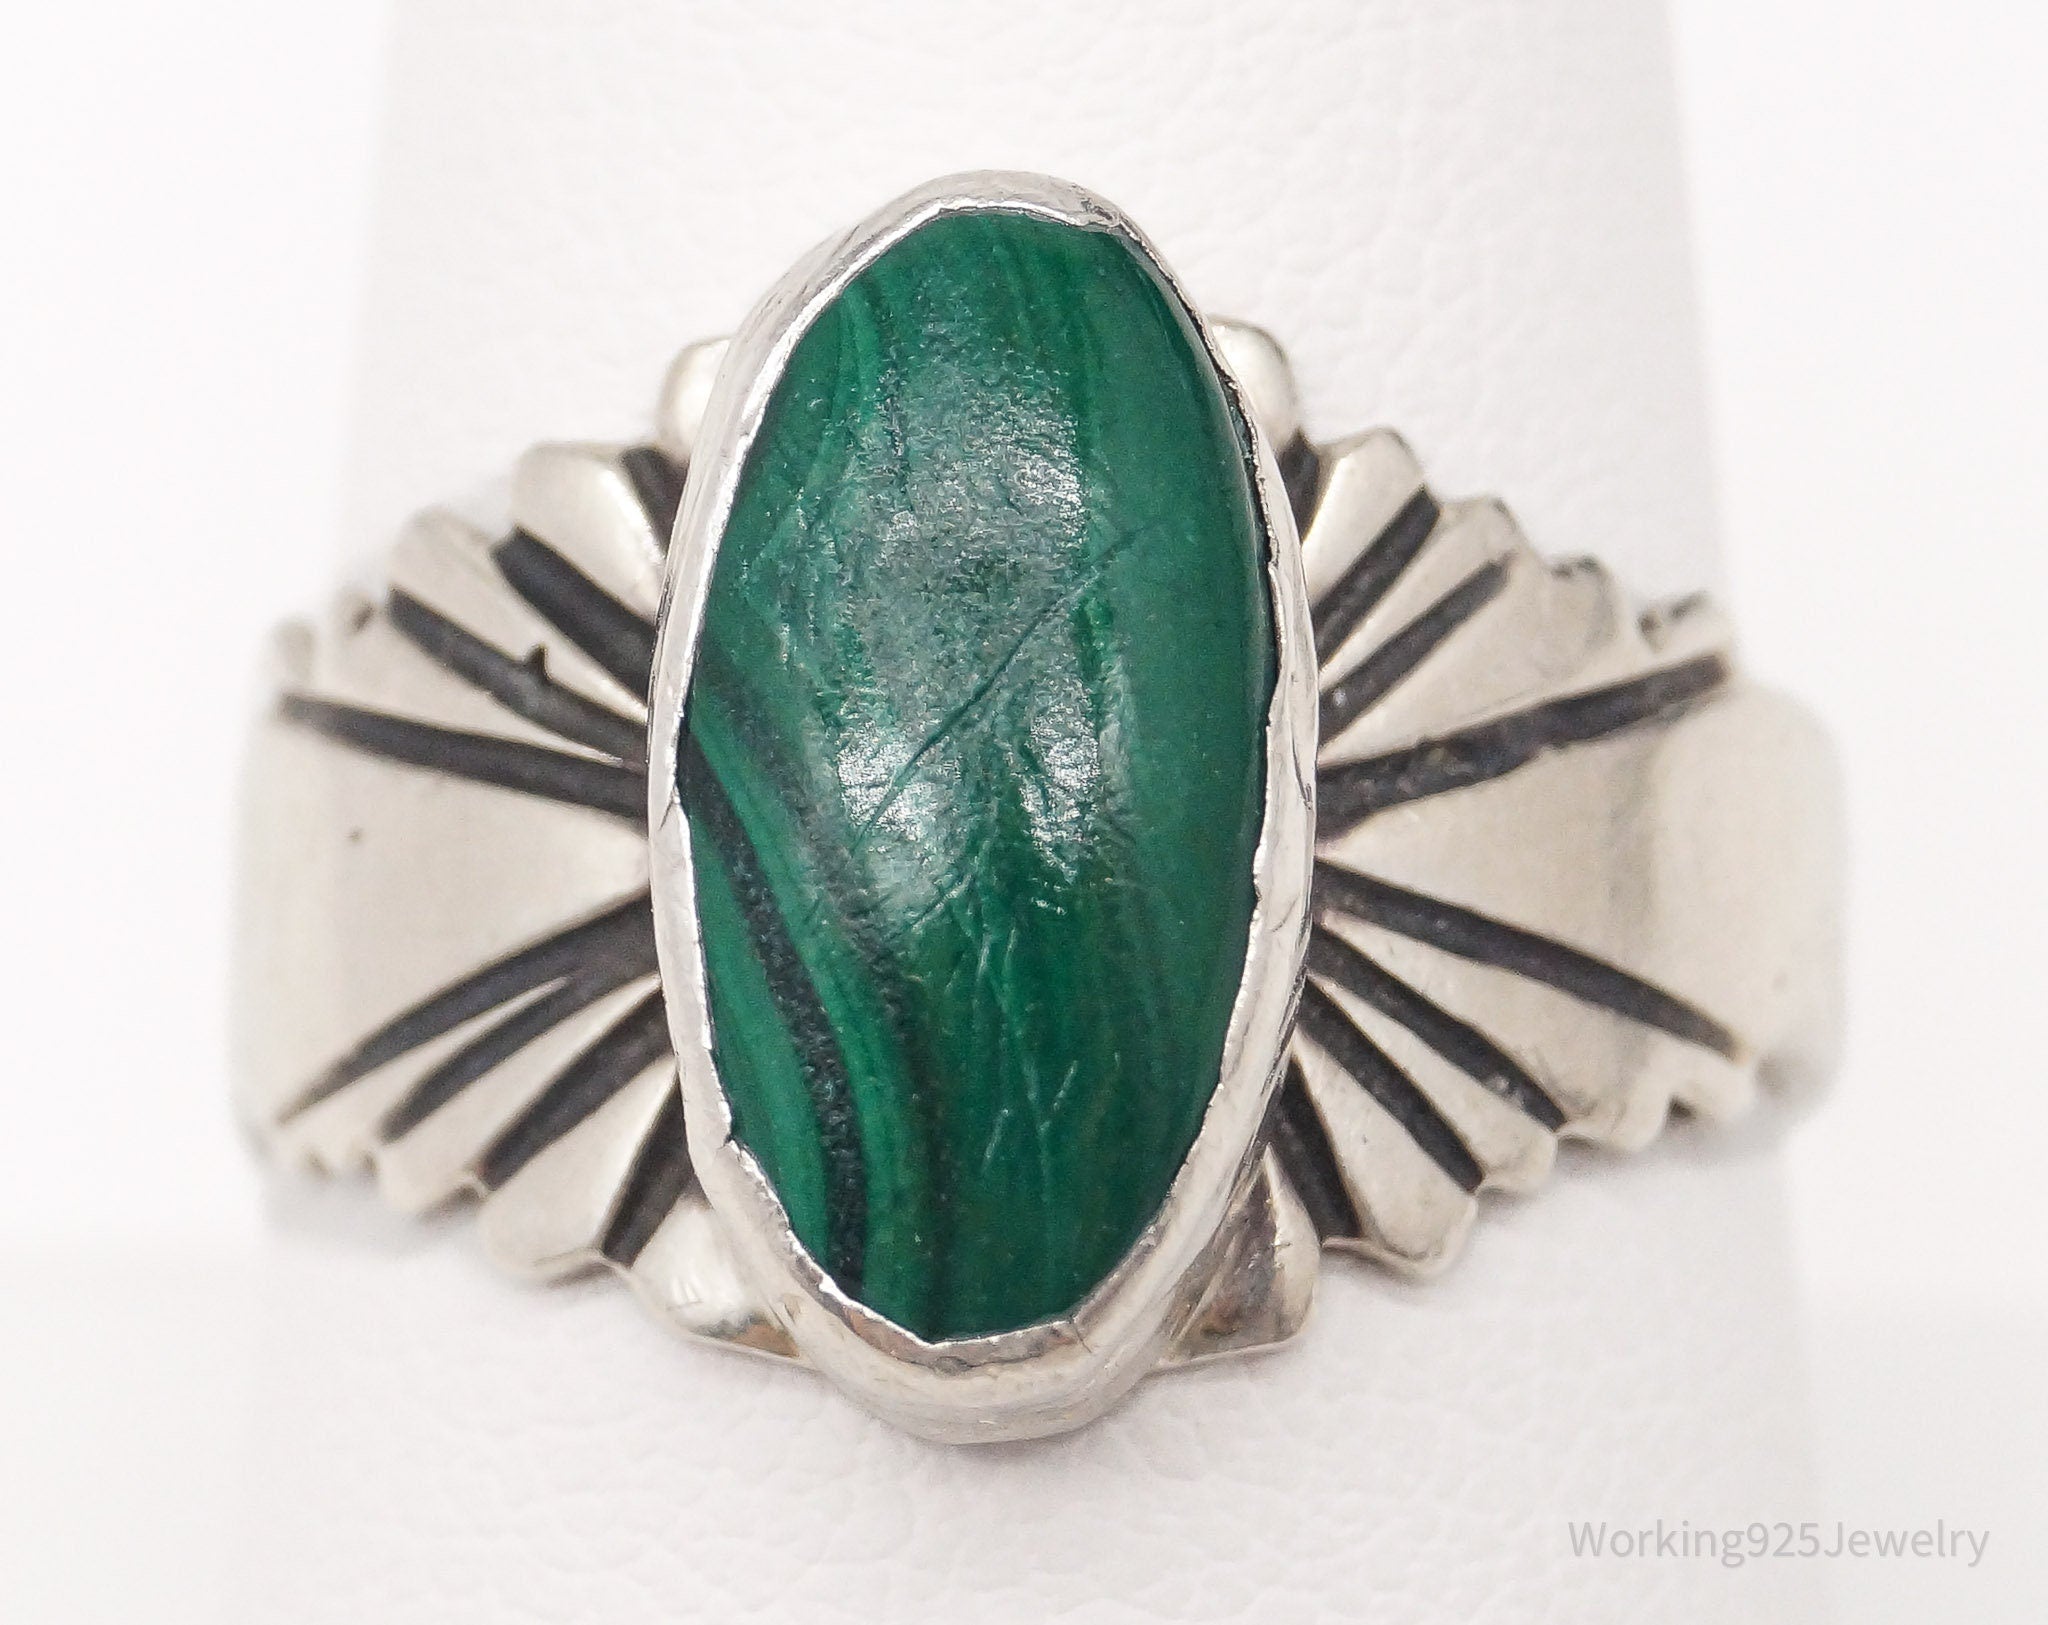 Vintage Native American Malachite Sterling Silver Ring - Size 9.25